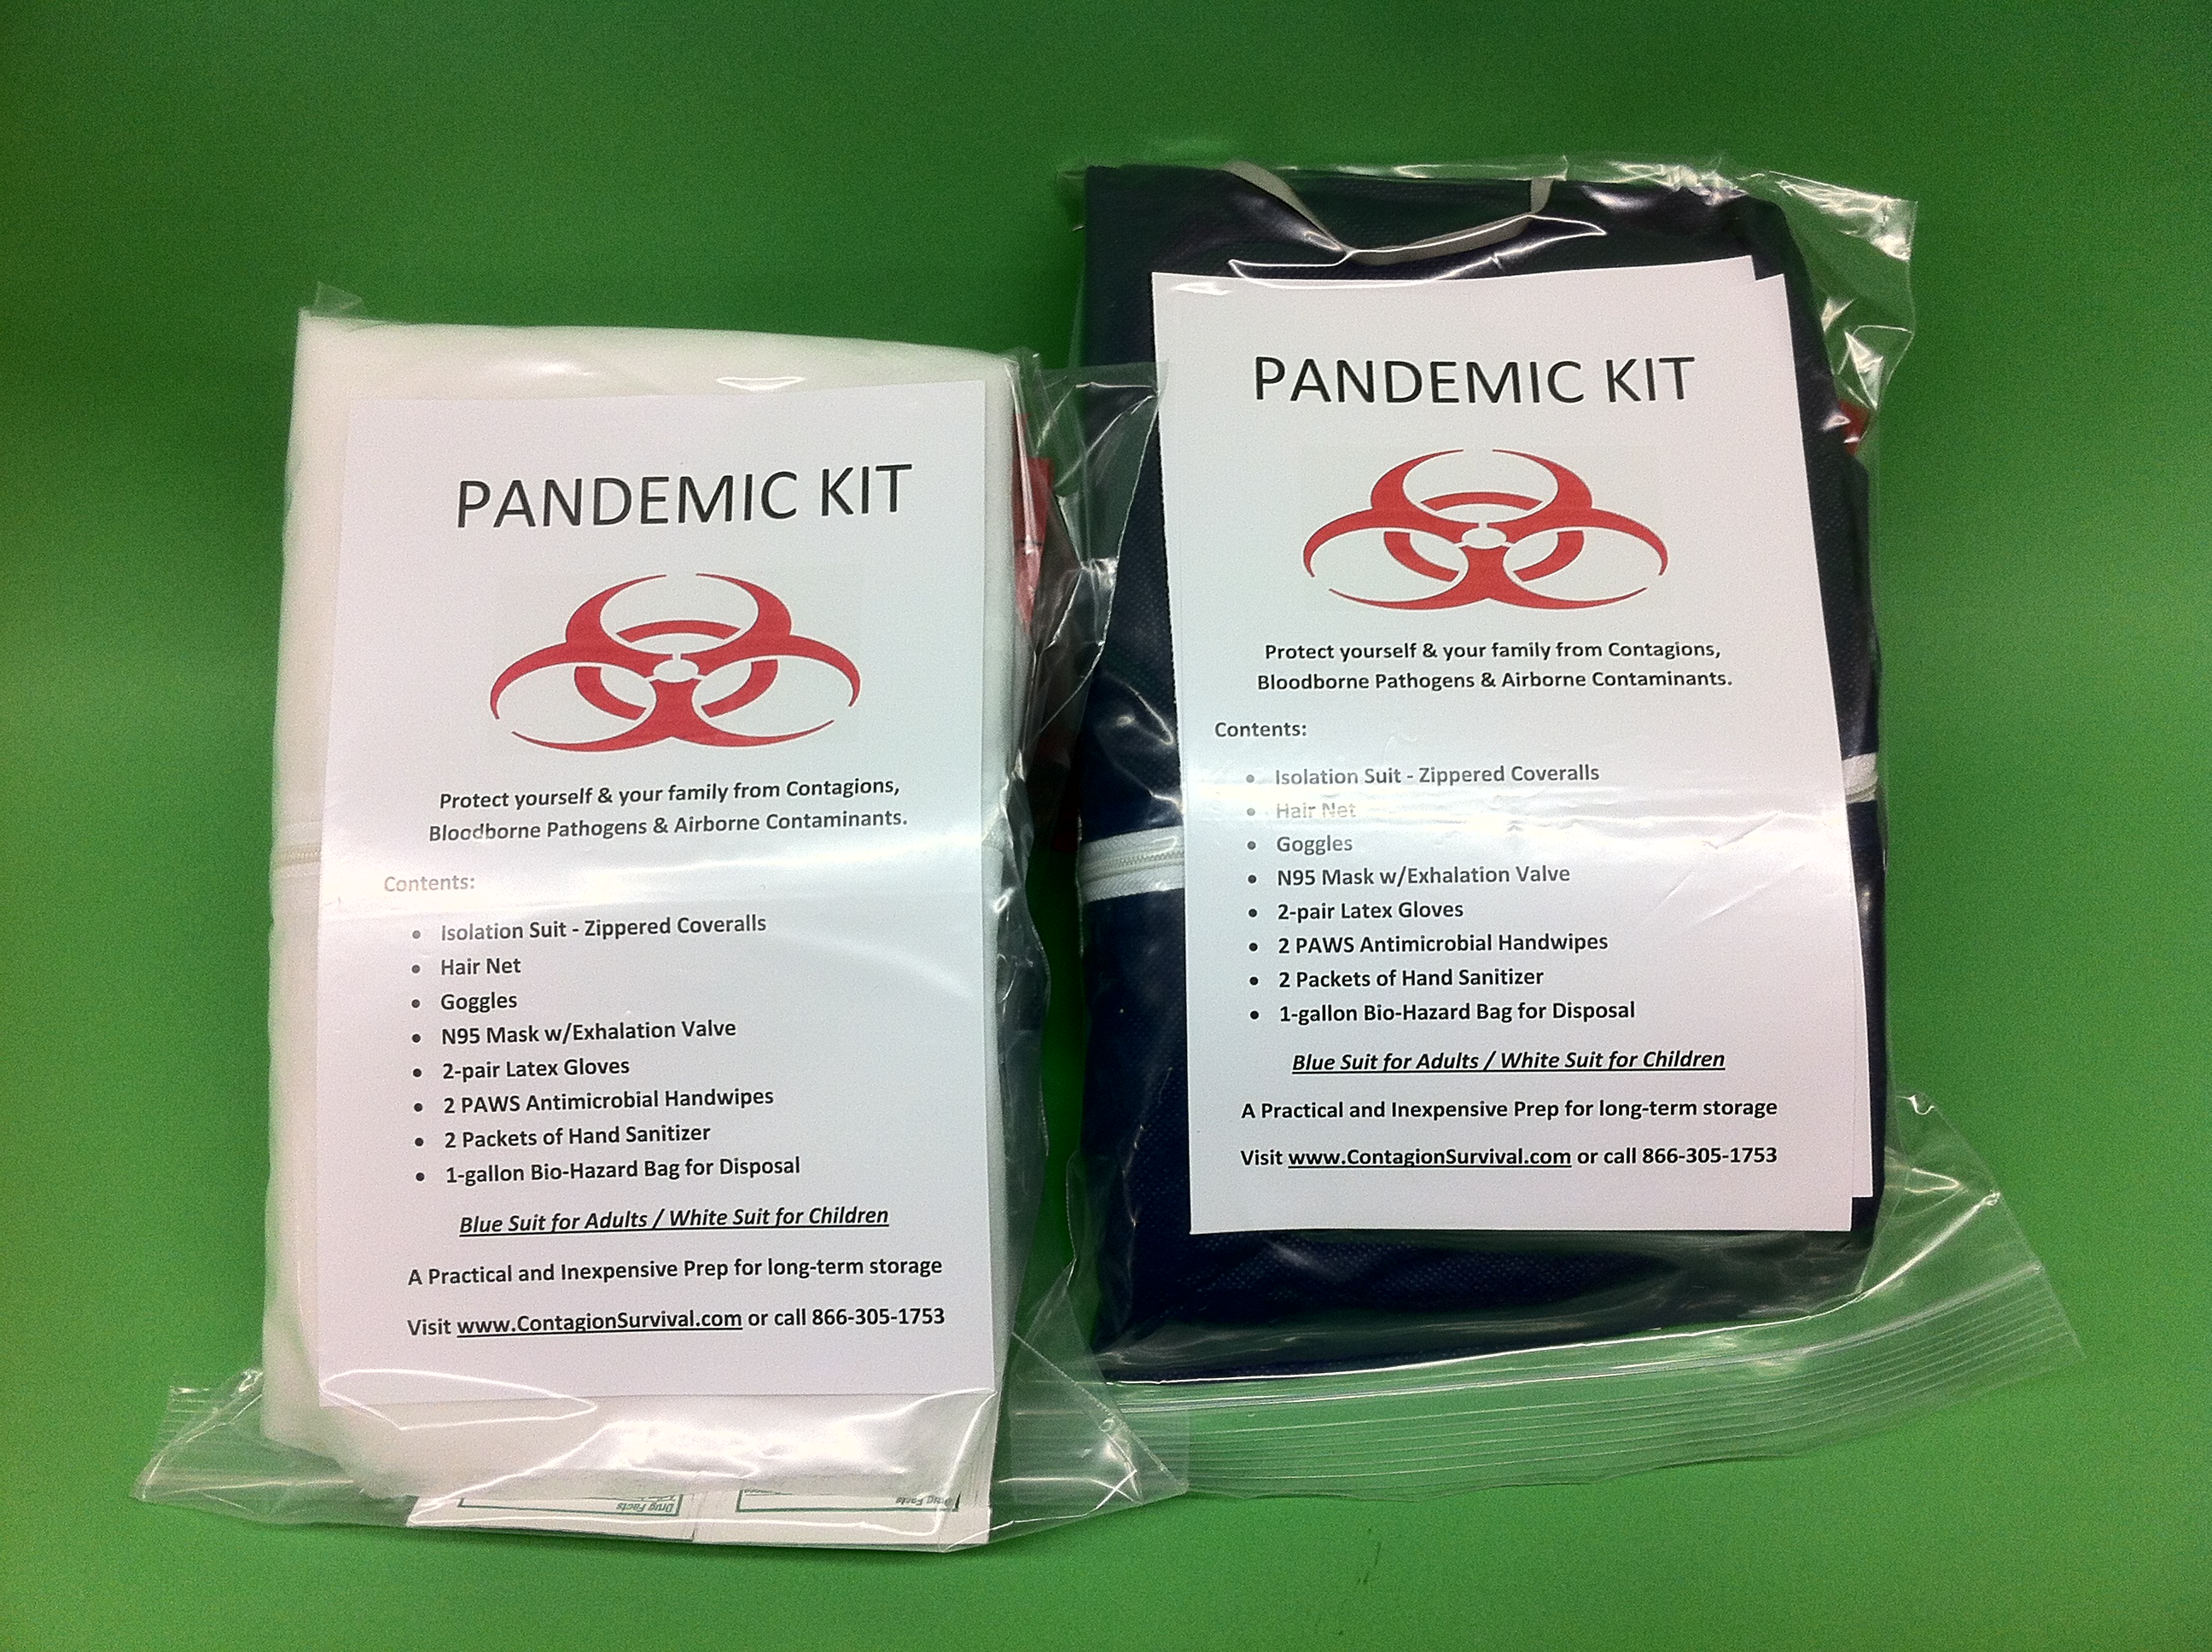 Pandemic Quick Kits are inexpensive and disposable and can help protect your family from contagions.